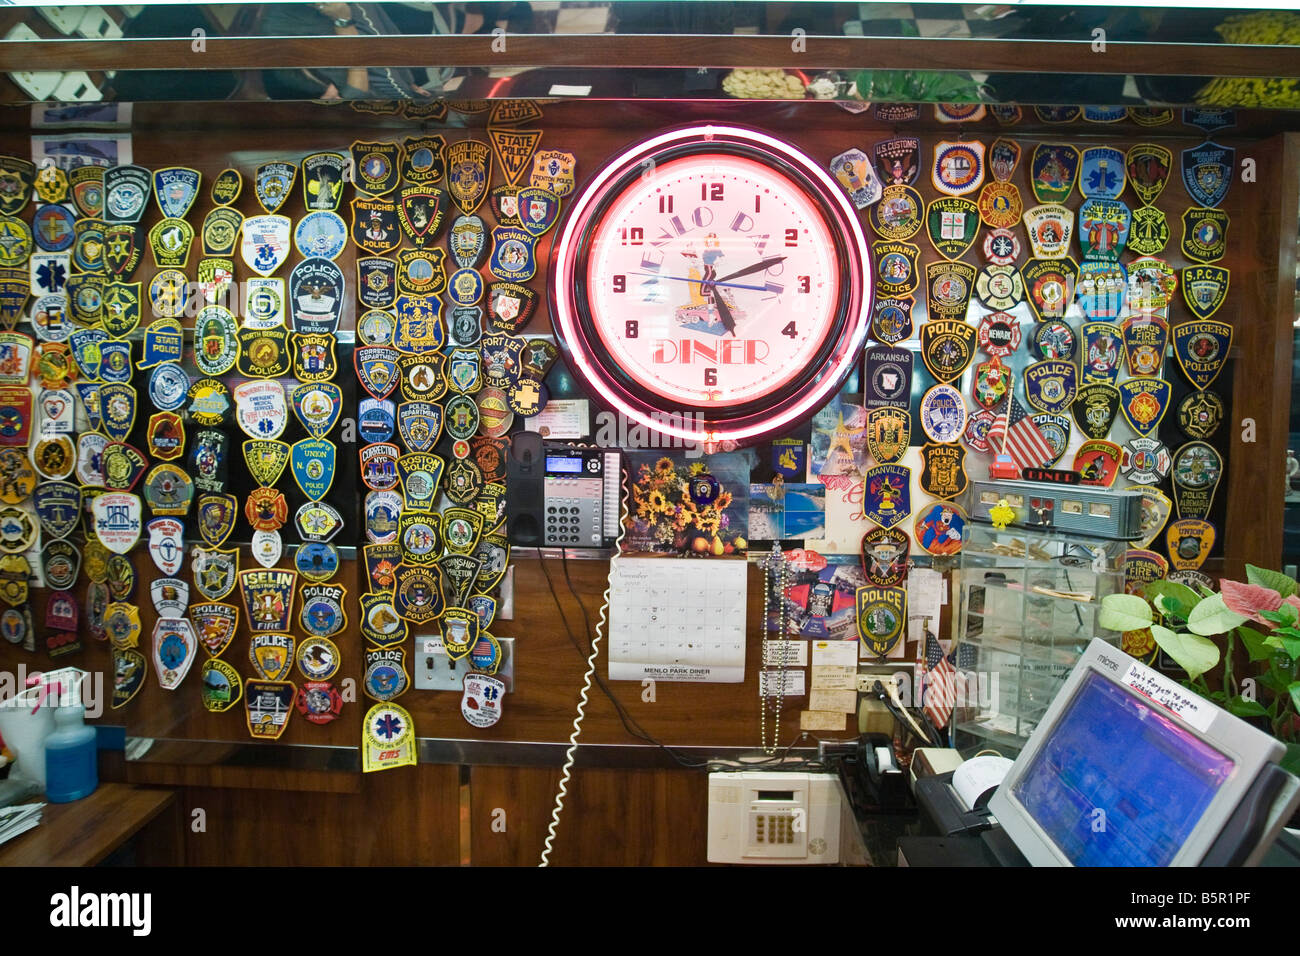 Police and emergency services badges on a wall in a diner Stock Photo